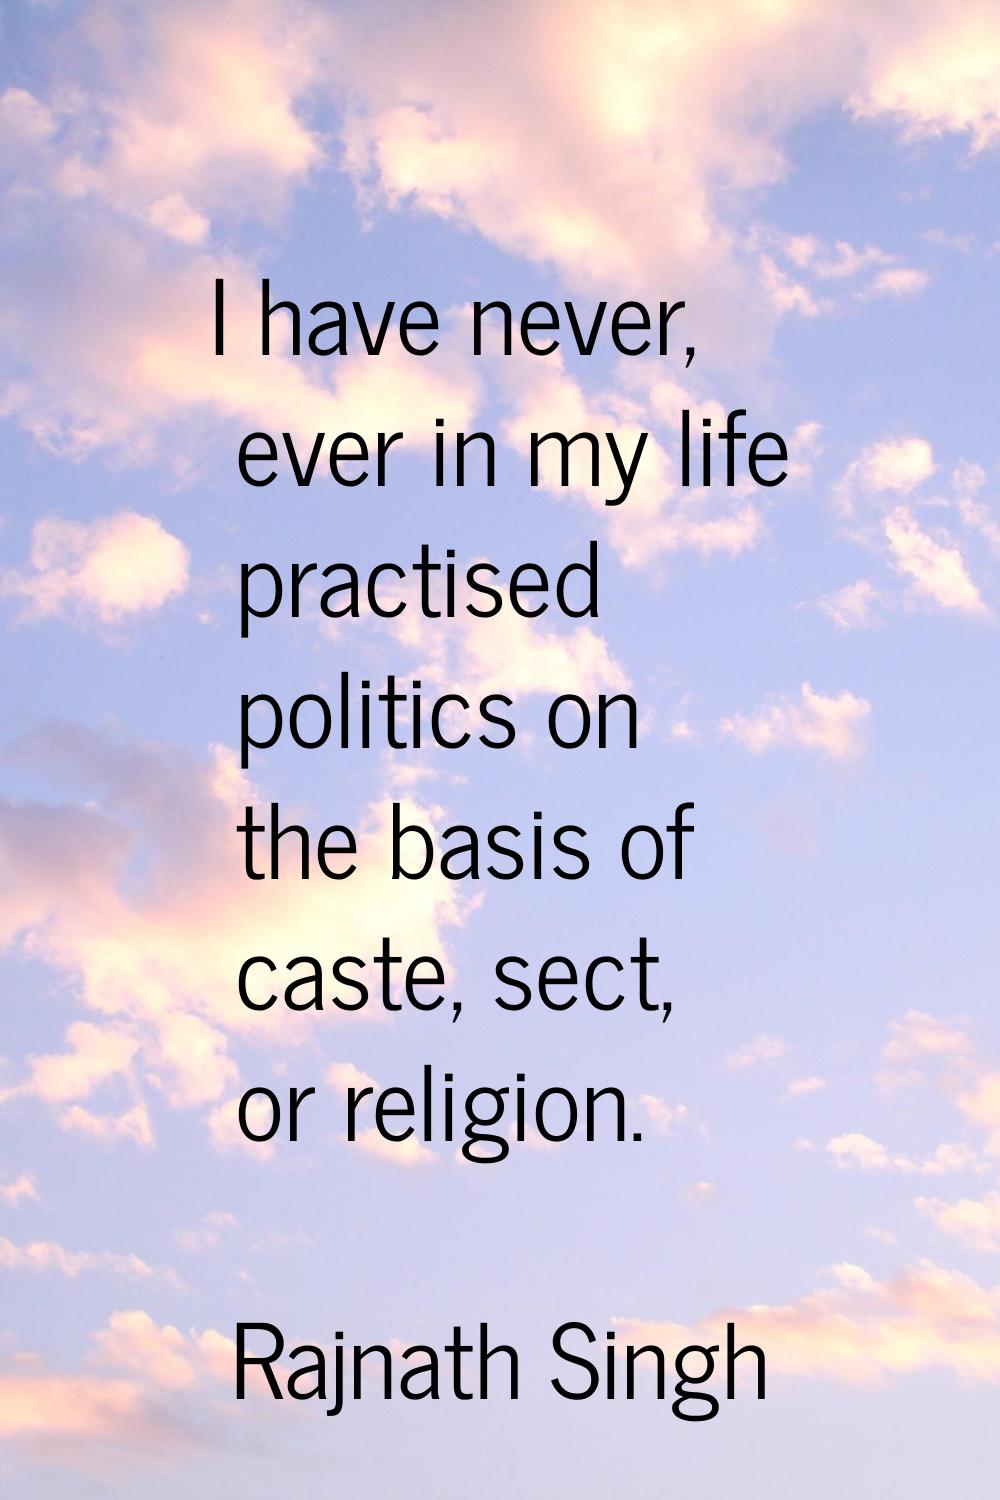 I have never, ever in my life practised politics on the basis of caste, sect, or religion.